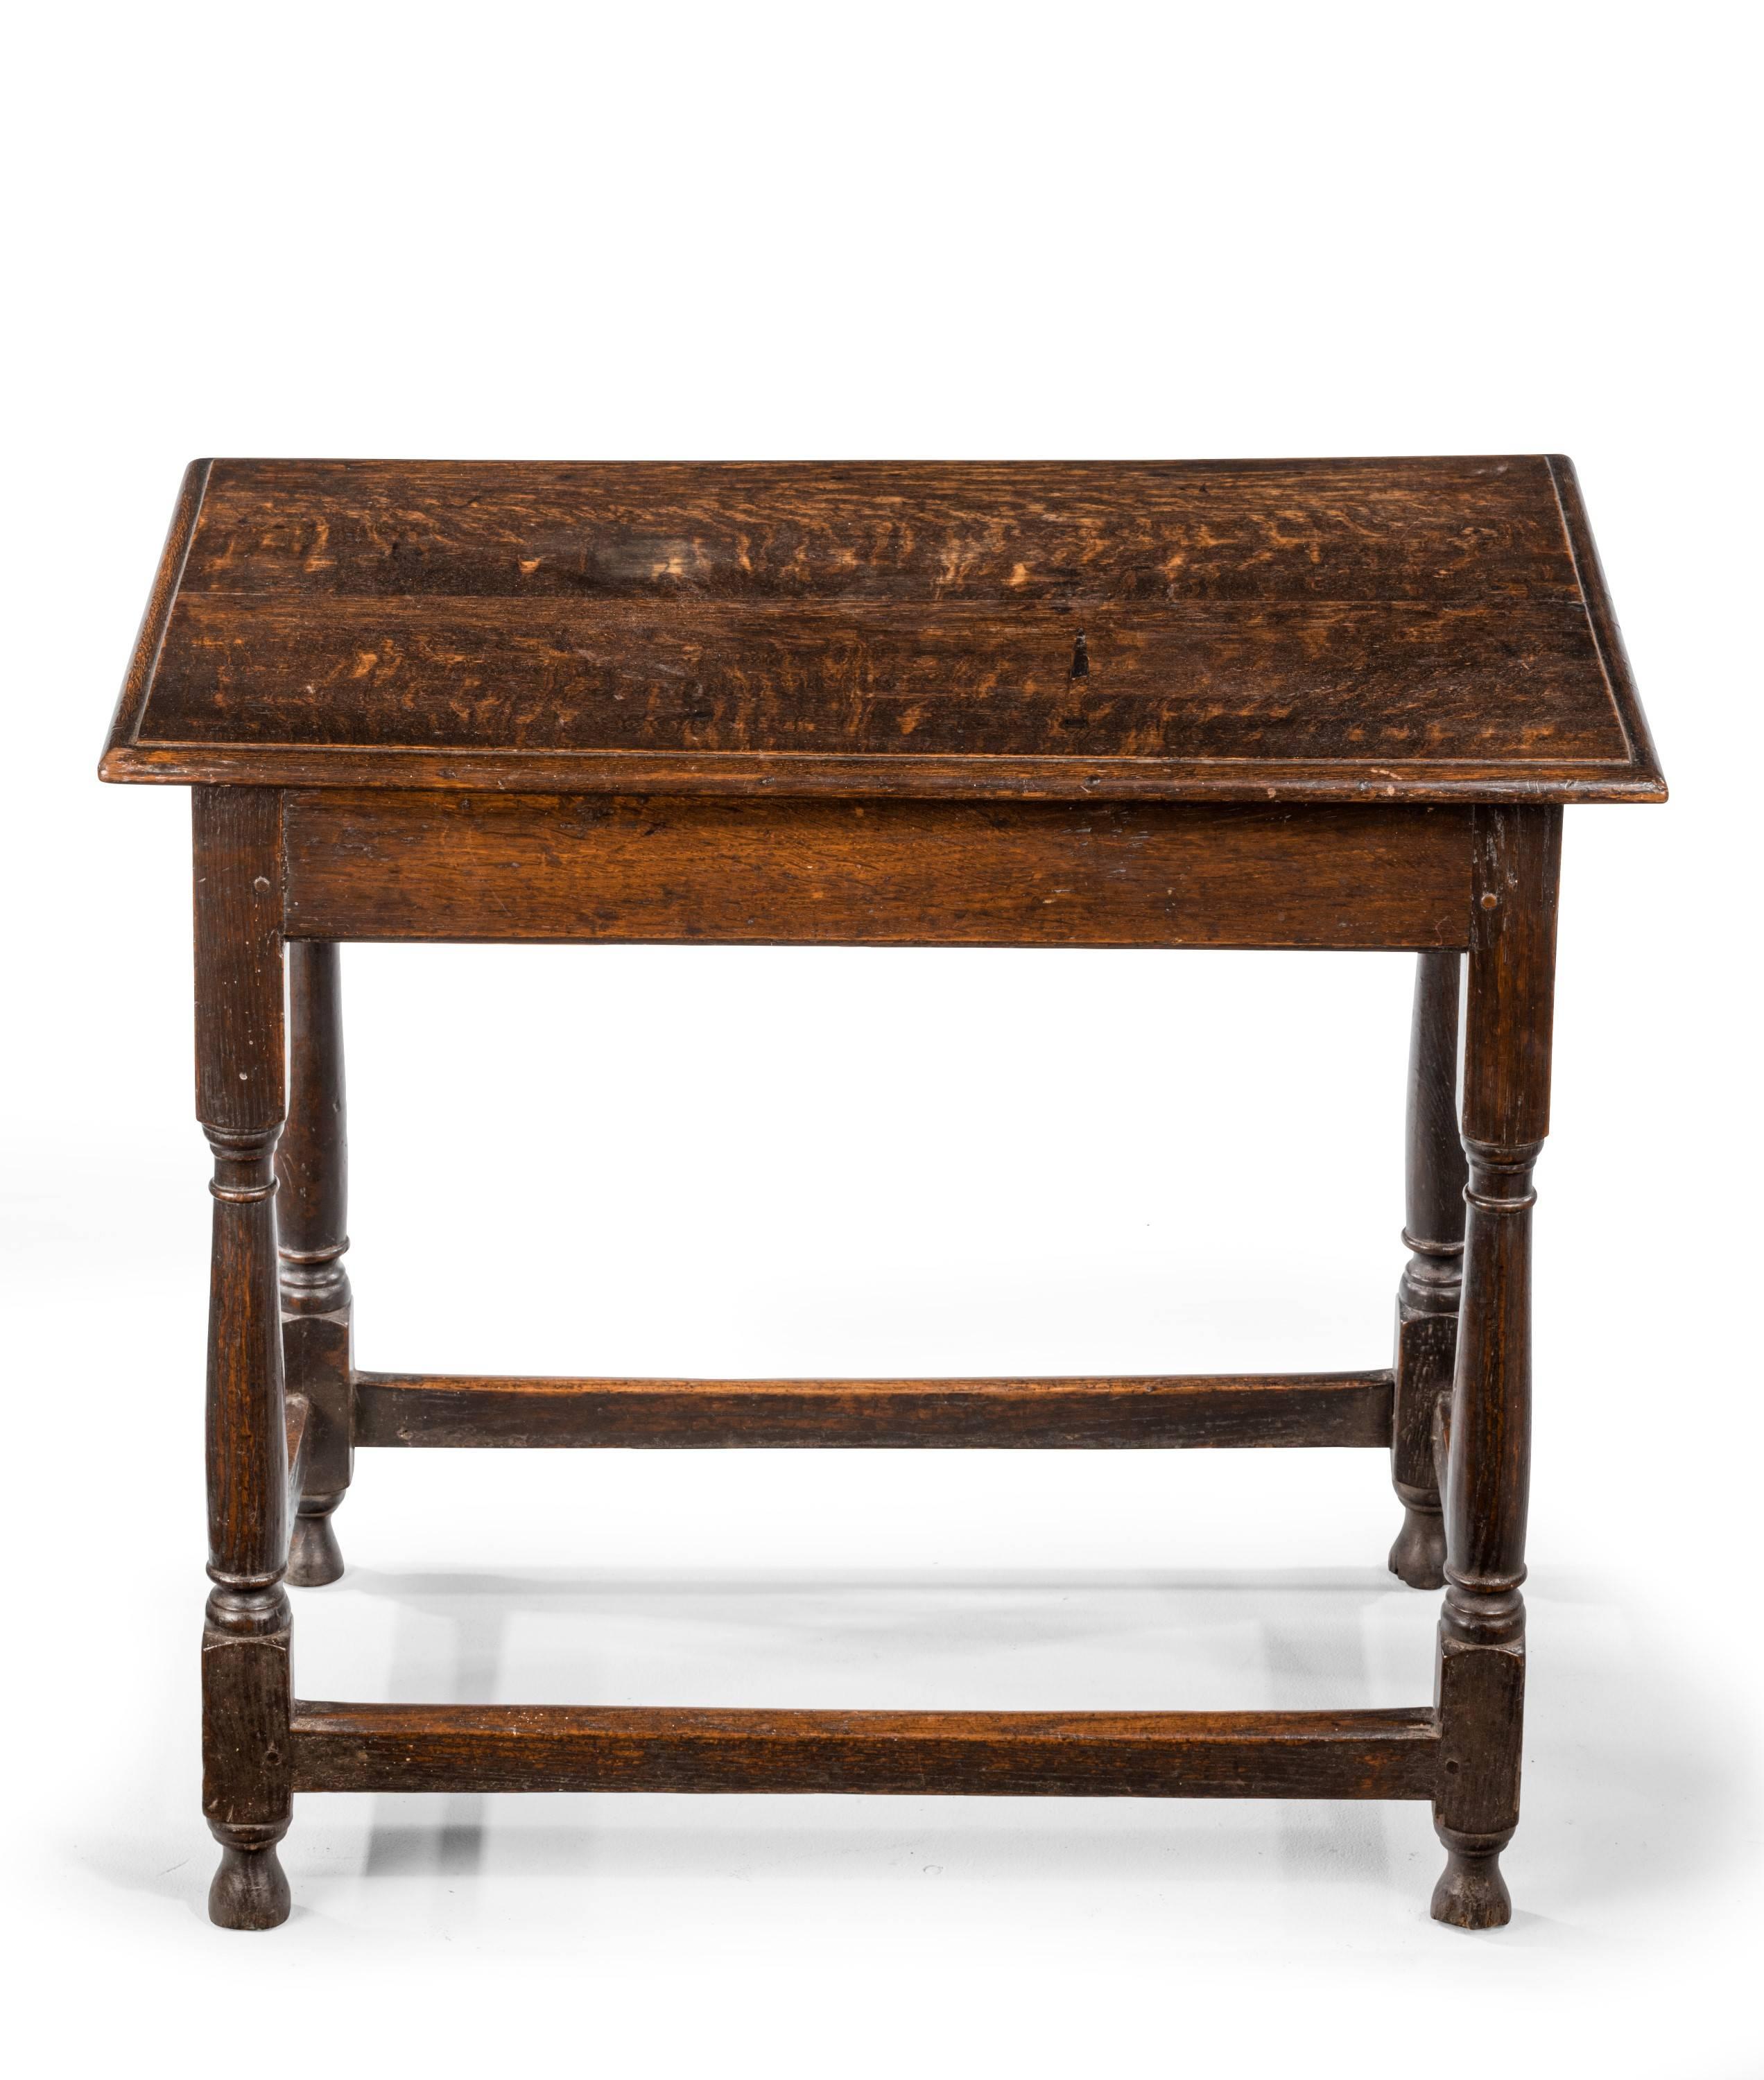 English Mid-18th Century Side Table